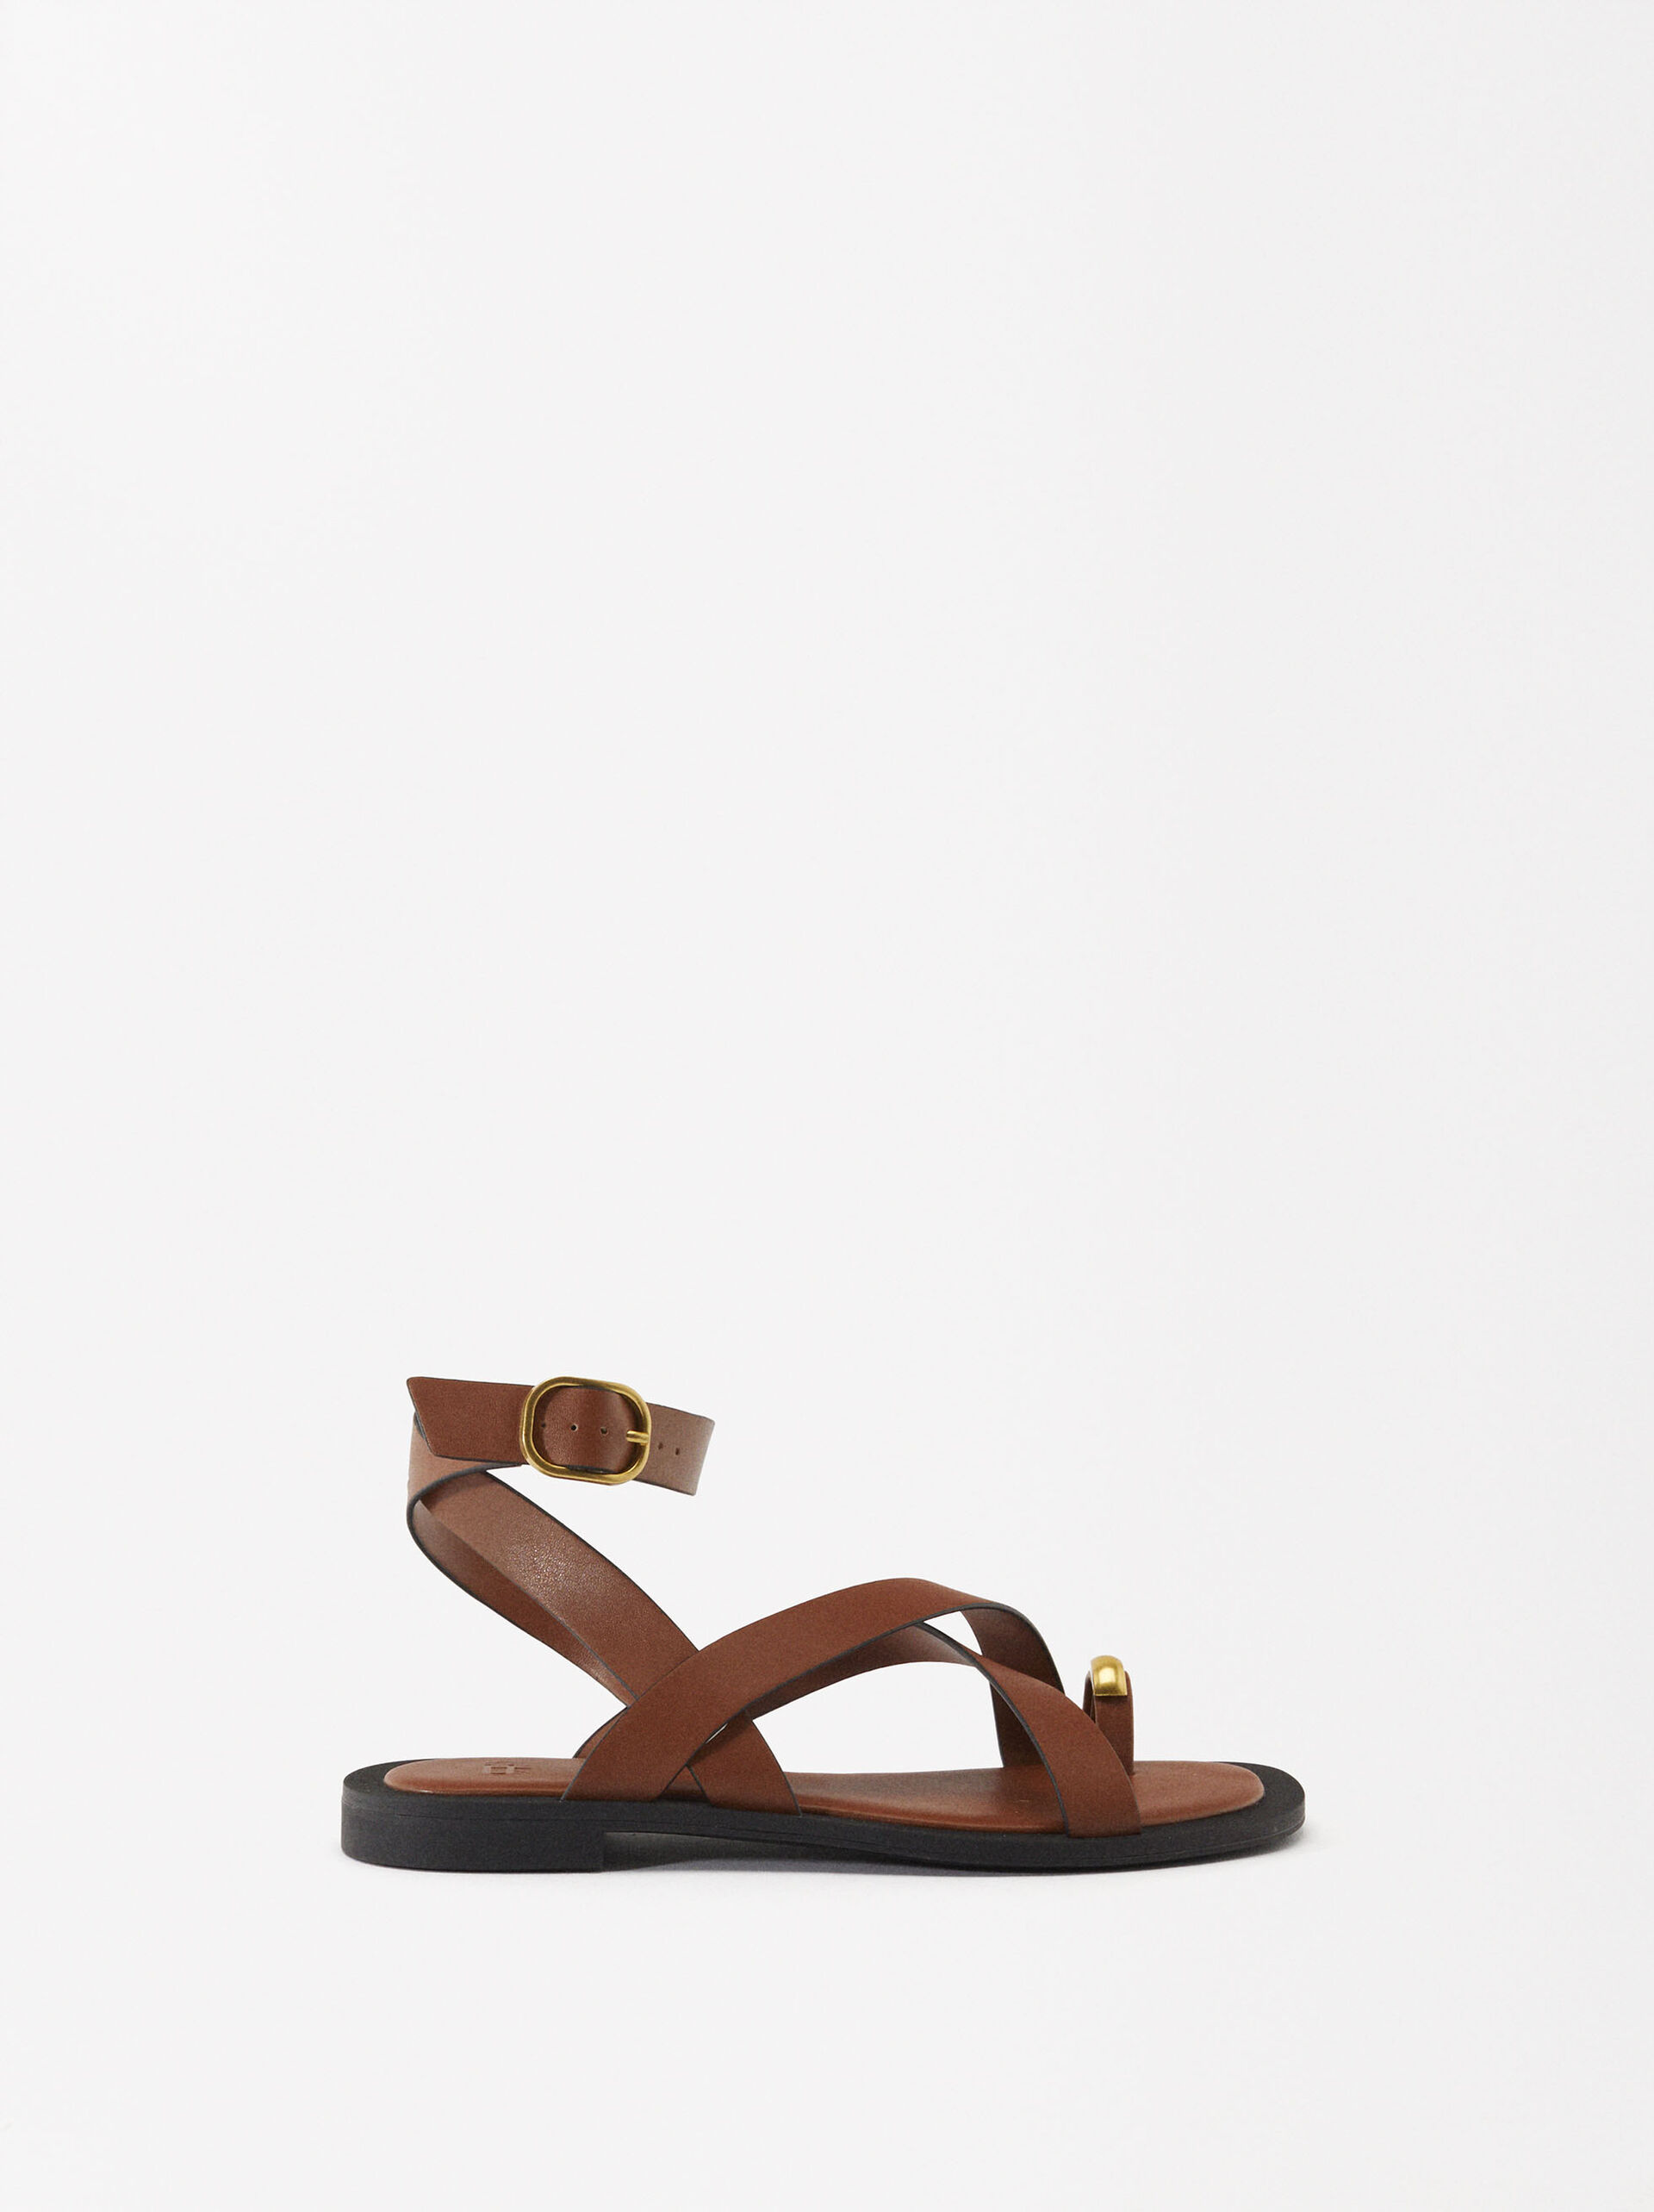 Criss-Cross Flat Sandals With Metallic Detail image number 1.0